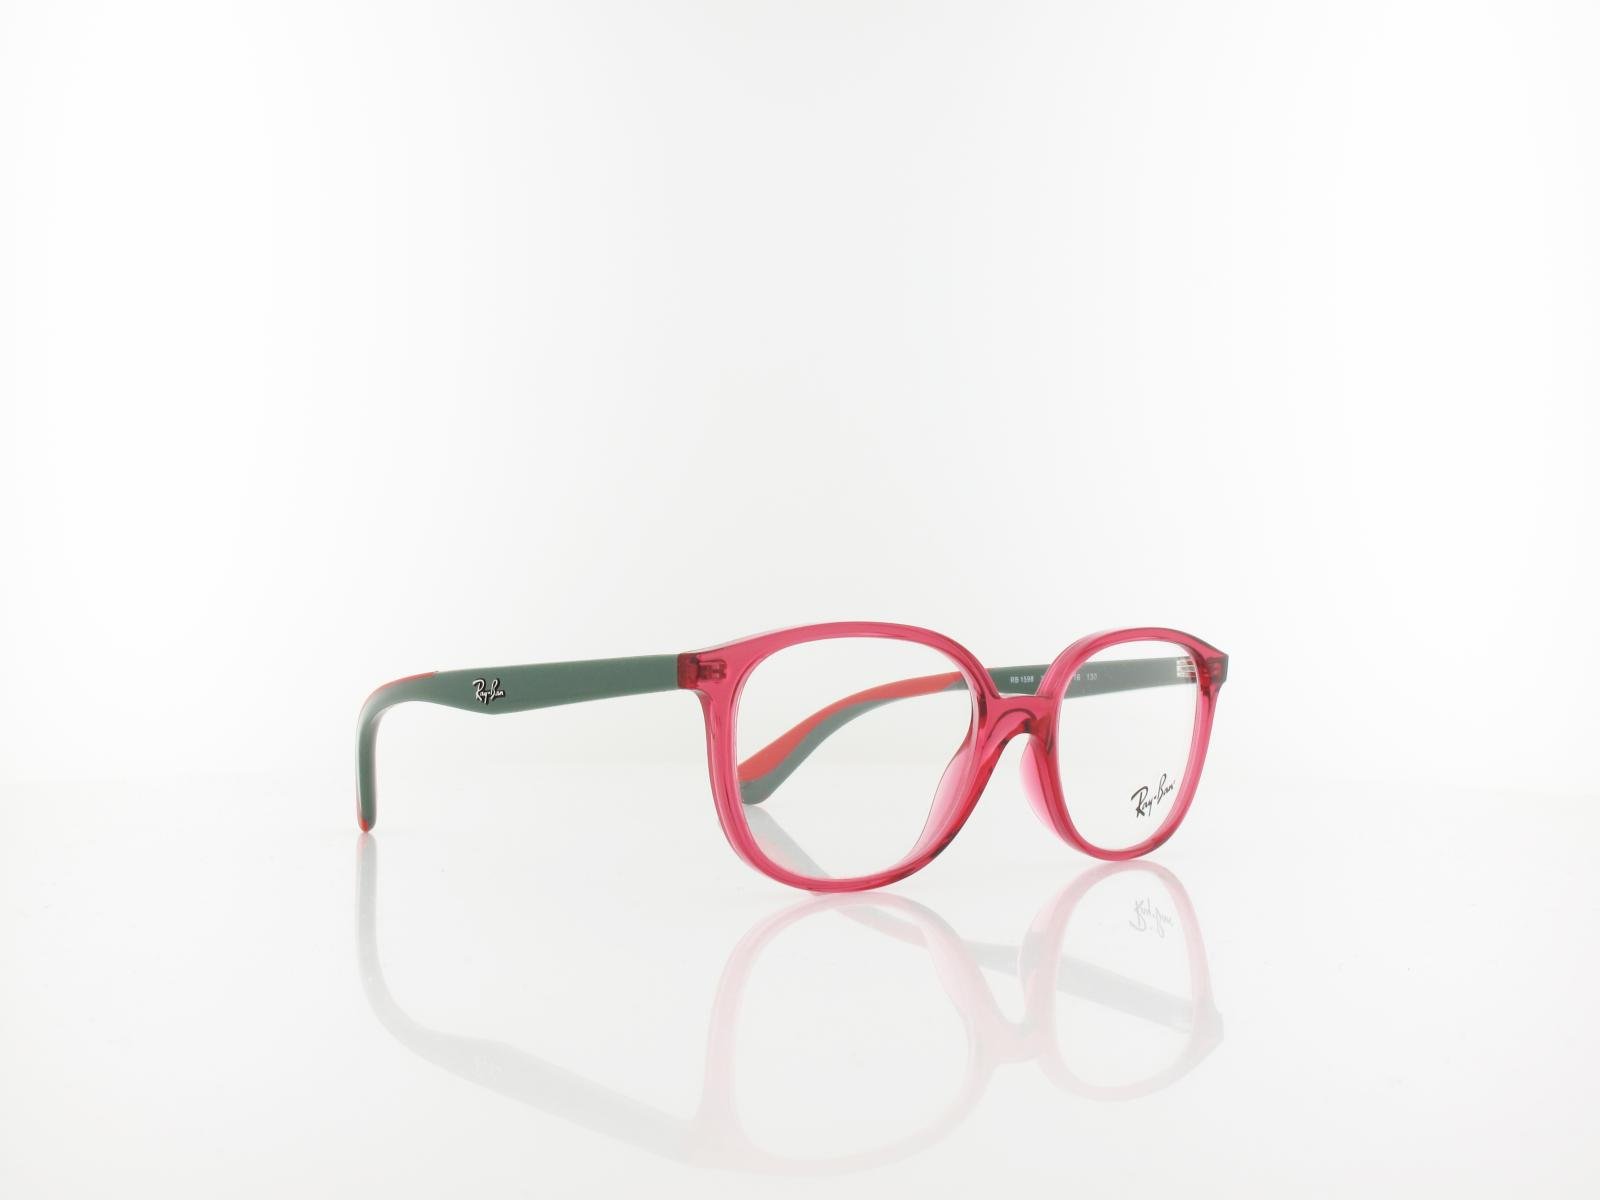 Ray Ban | RY1598 3886 47 | trasparent red